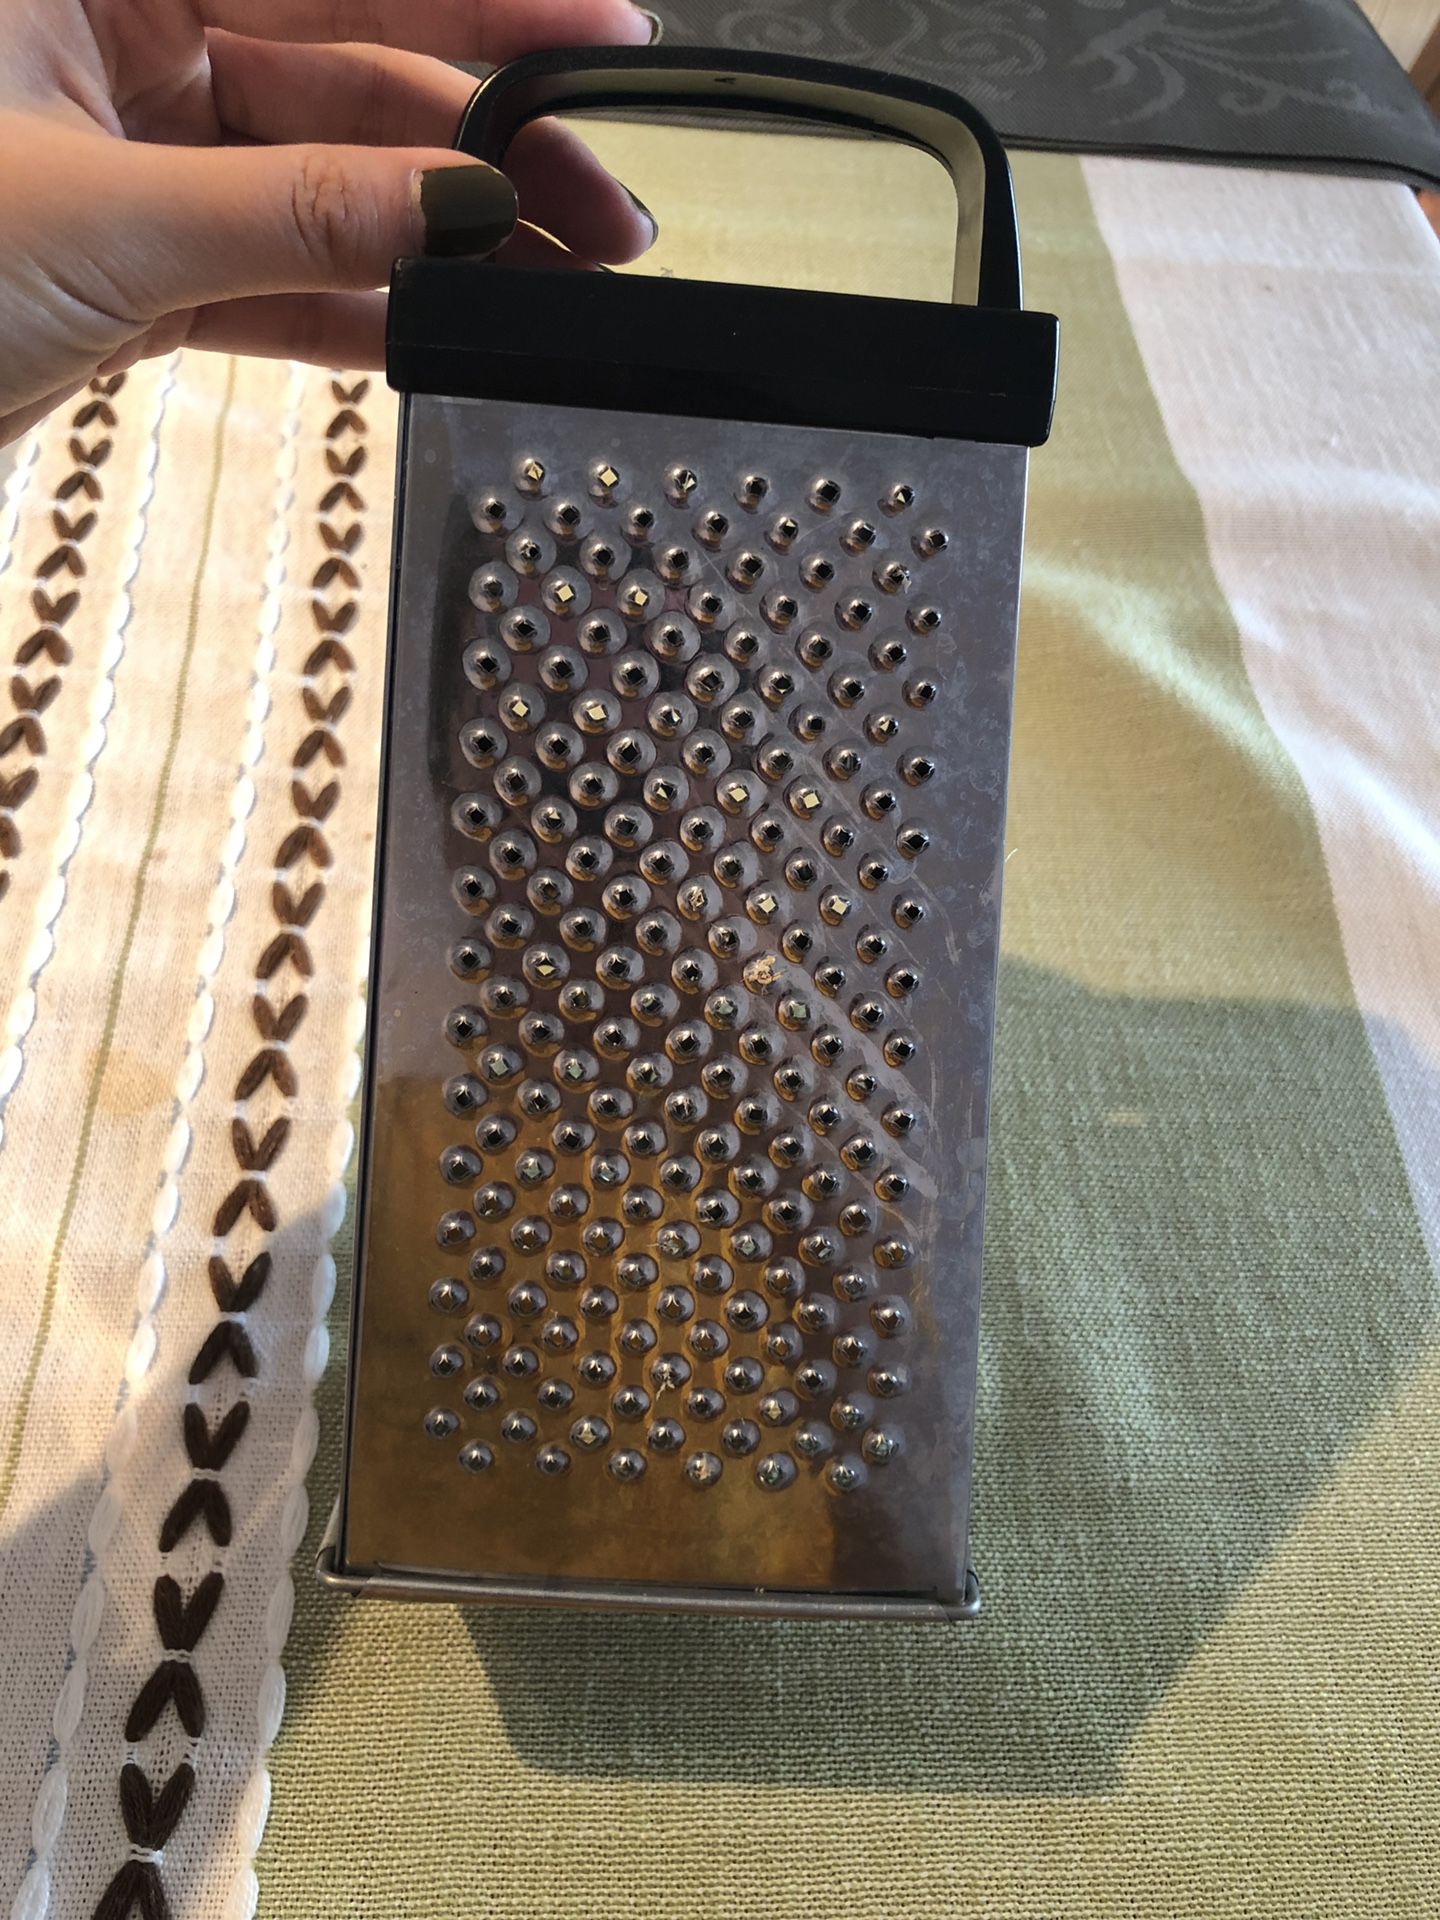 Box Grater, 4-Sided Stainless Steel Large 10-inch Grater for Parmesan Cheese, Ginger, Vegetables